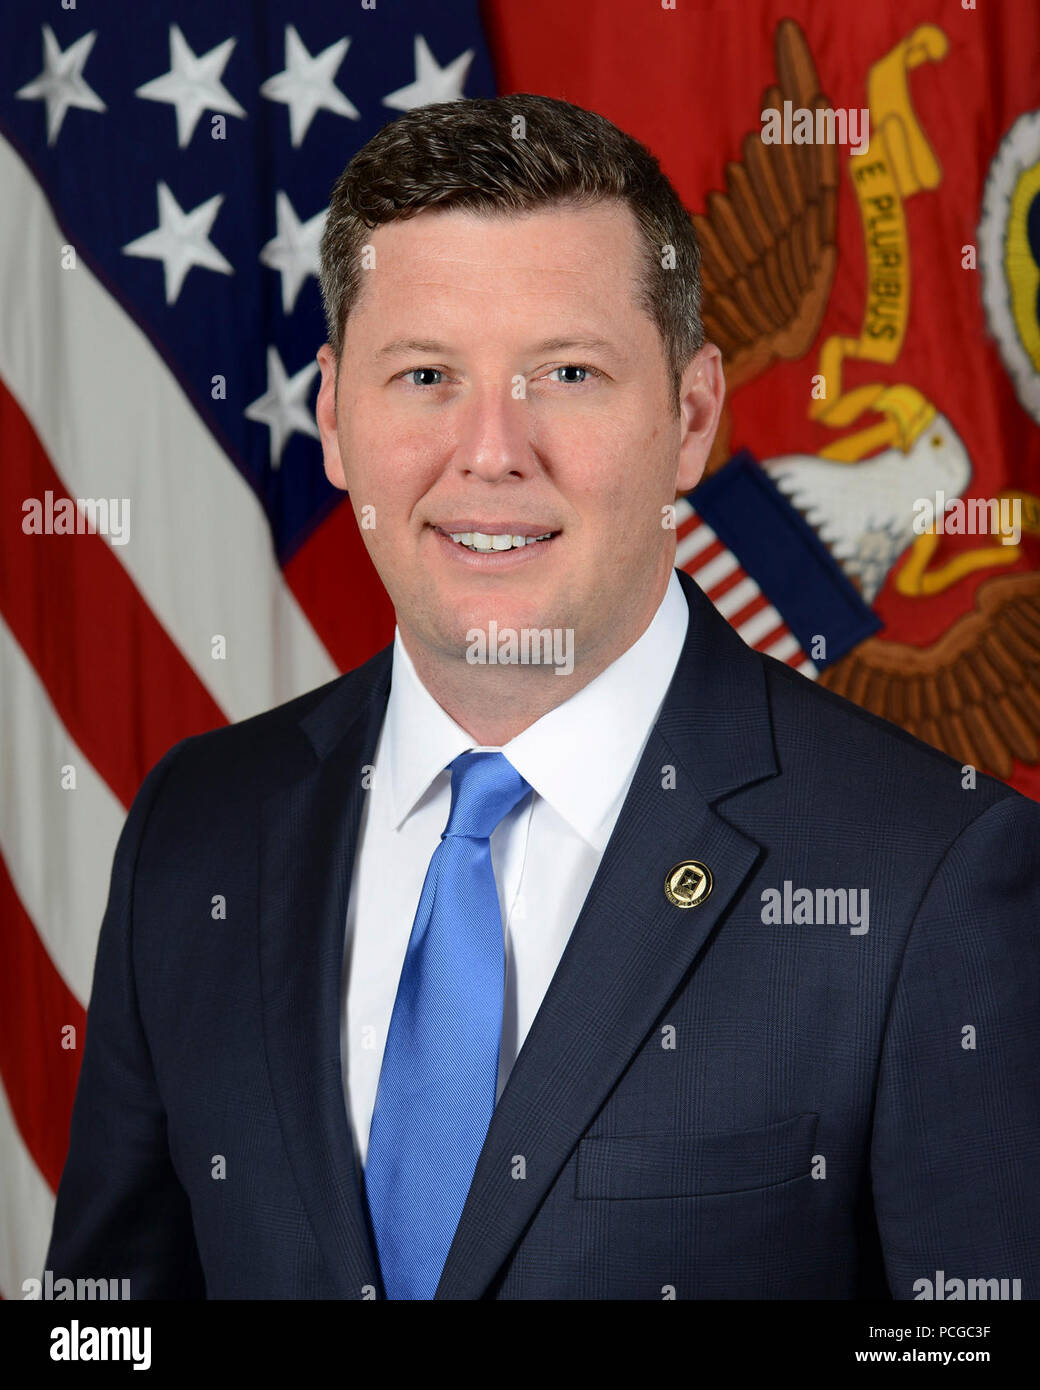 Patrick J. Murphy, the Acting Secretary of the Army, poses for his official portrait in the Army portrait studio at the Pentagon in Arlington, Virginia, May 3, 2016. Stock Photo